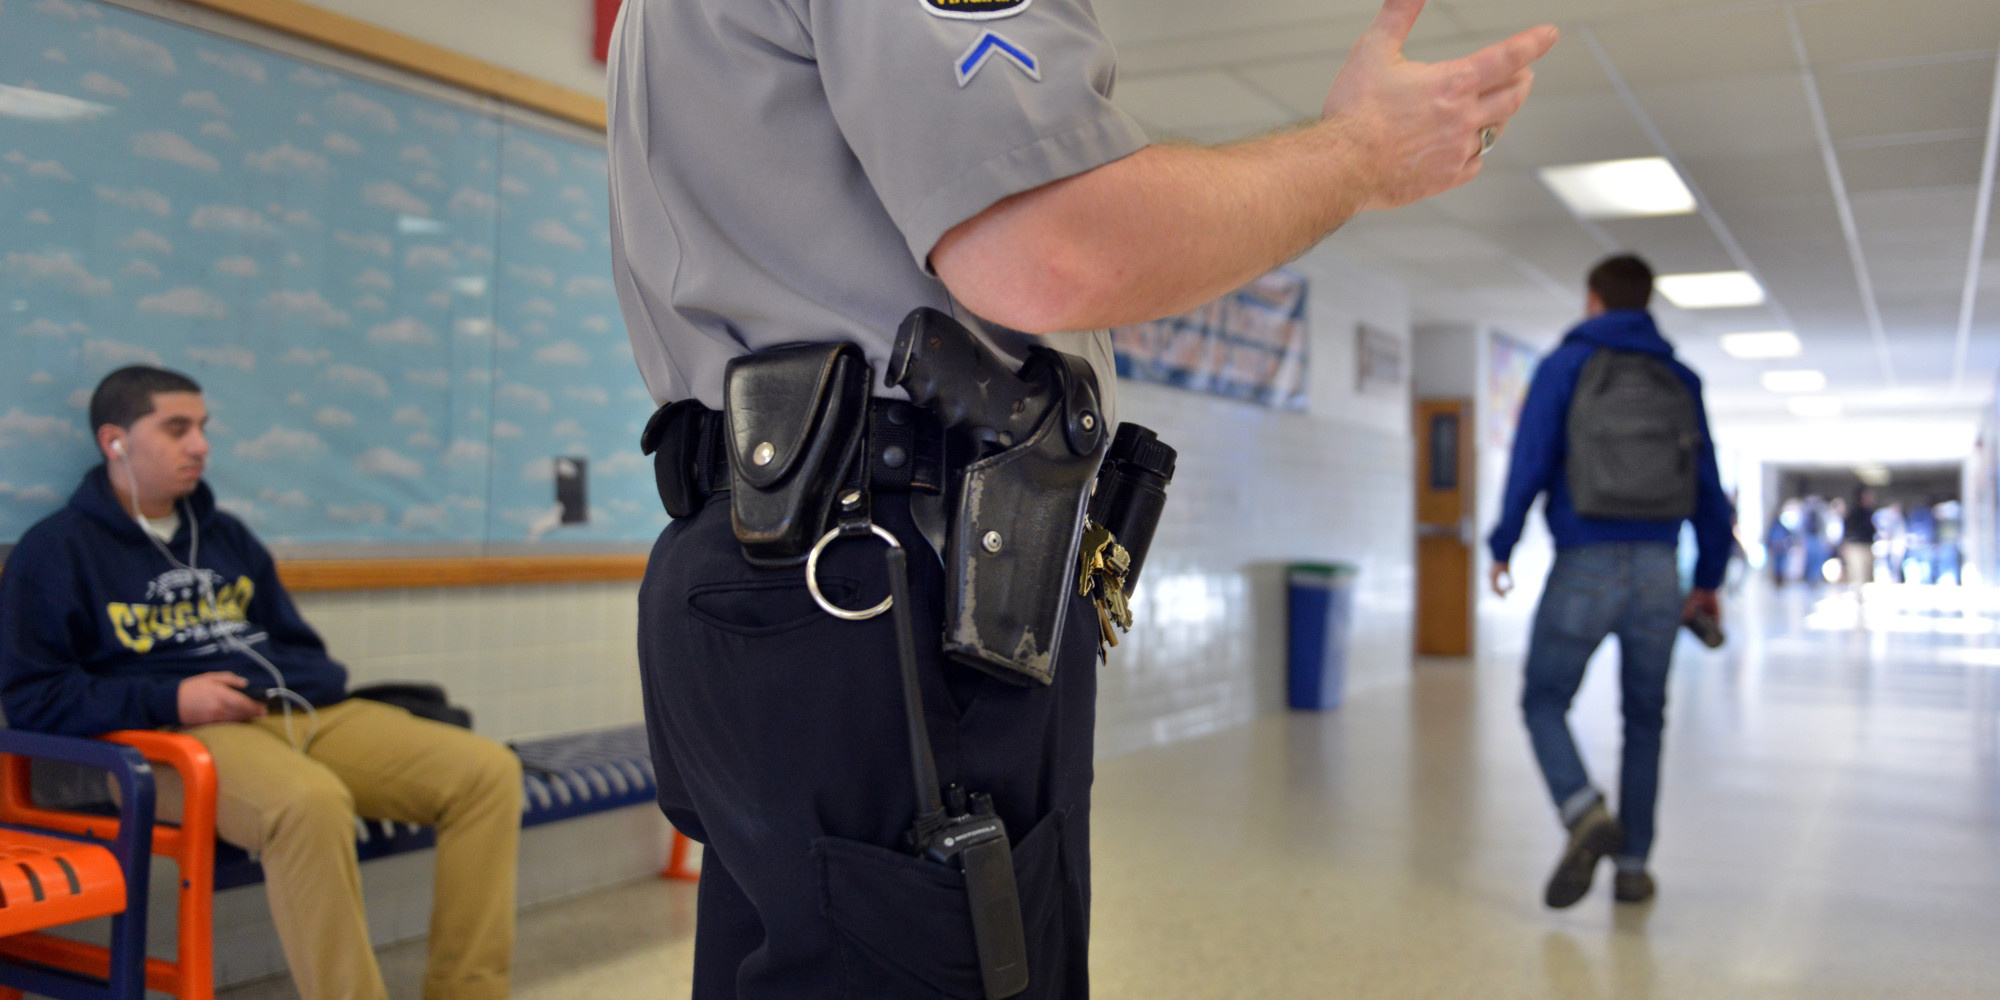 Fairfax County Public Schools and their Steps to Maintain School Security